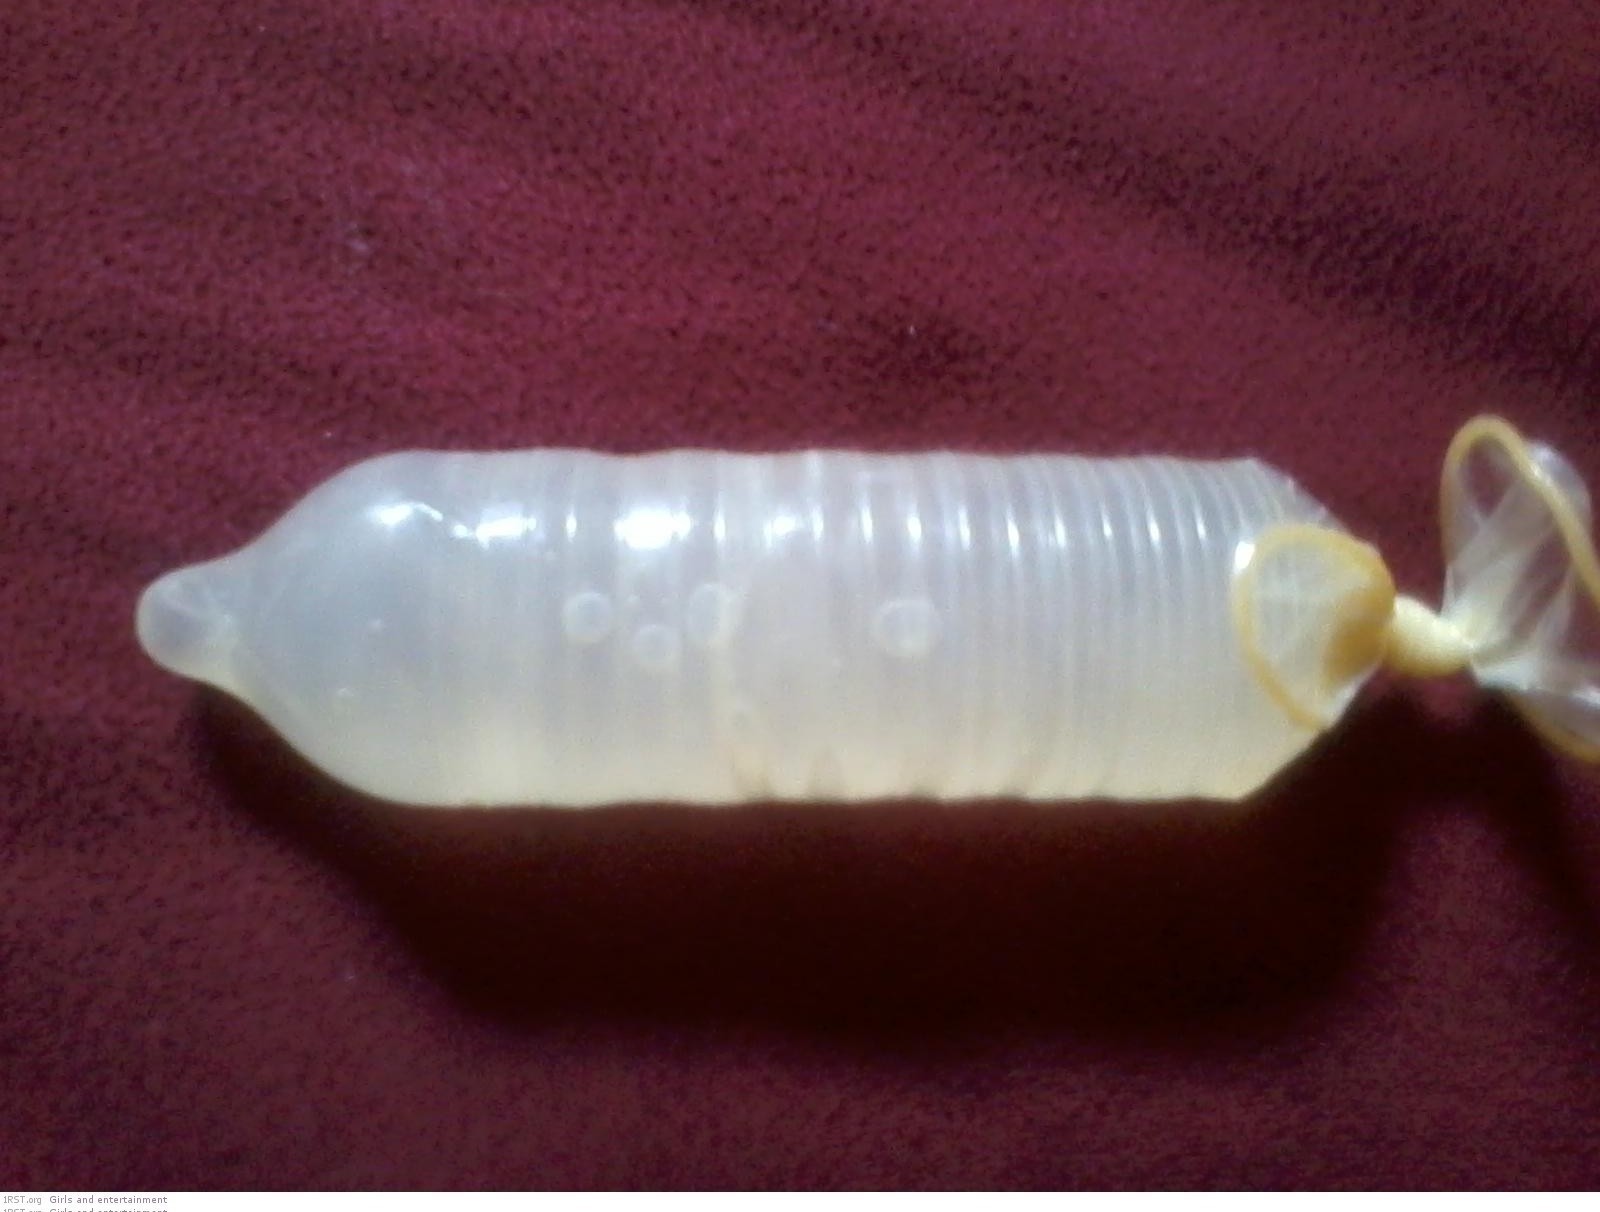 Household Items To Use As A Dildo 13